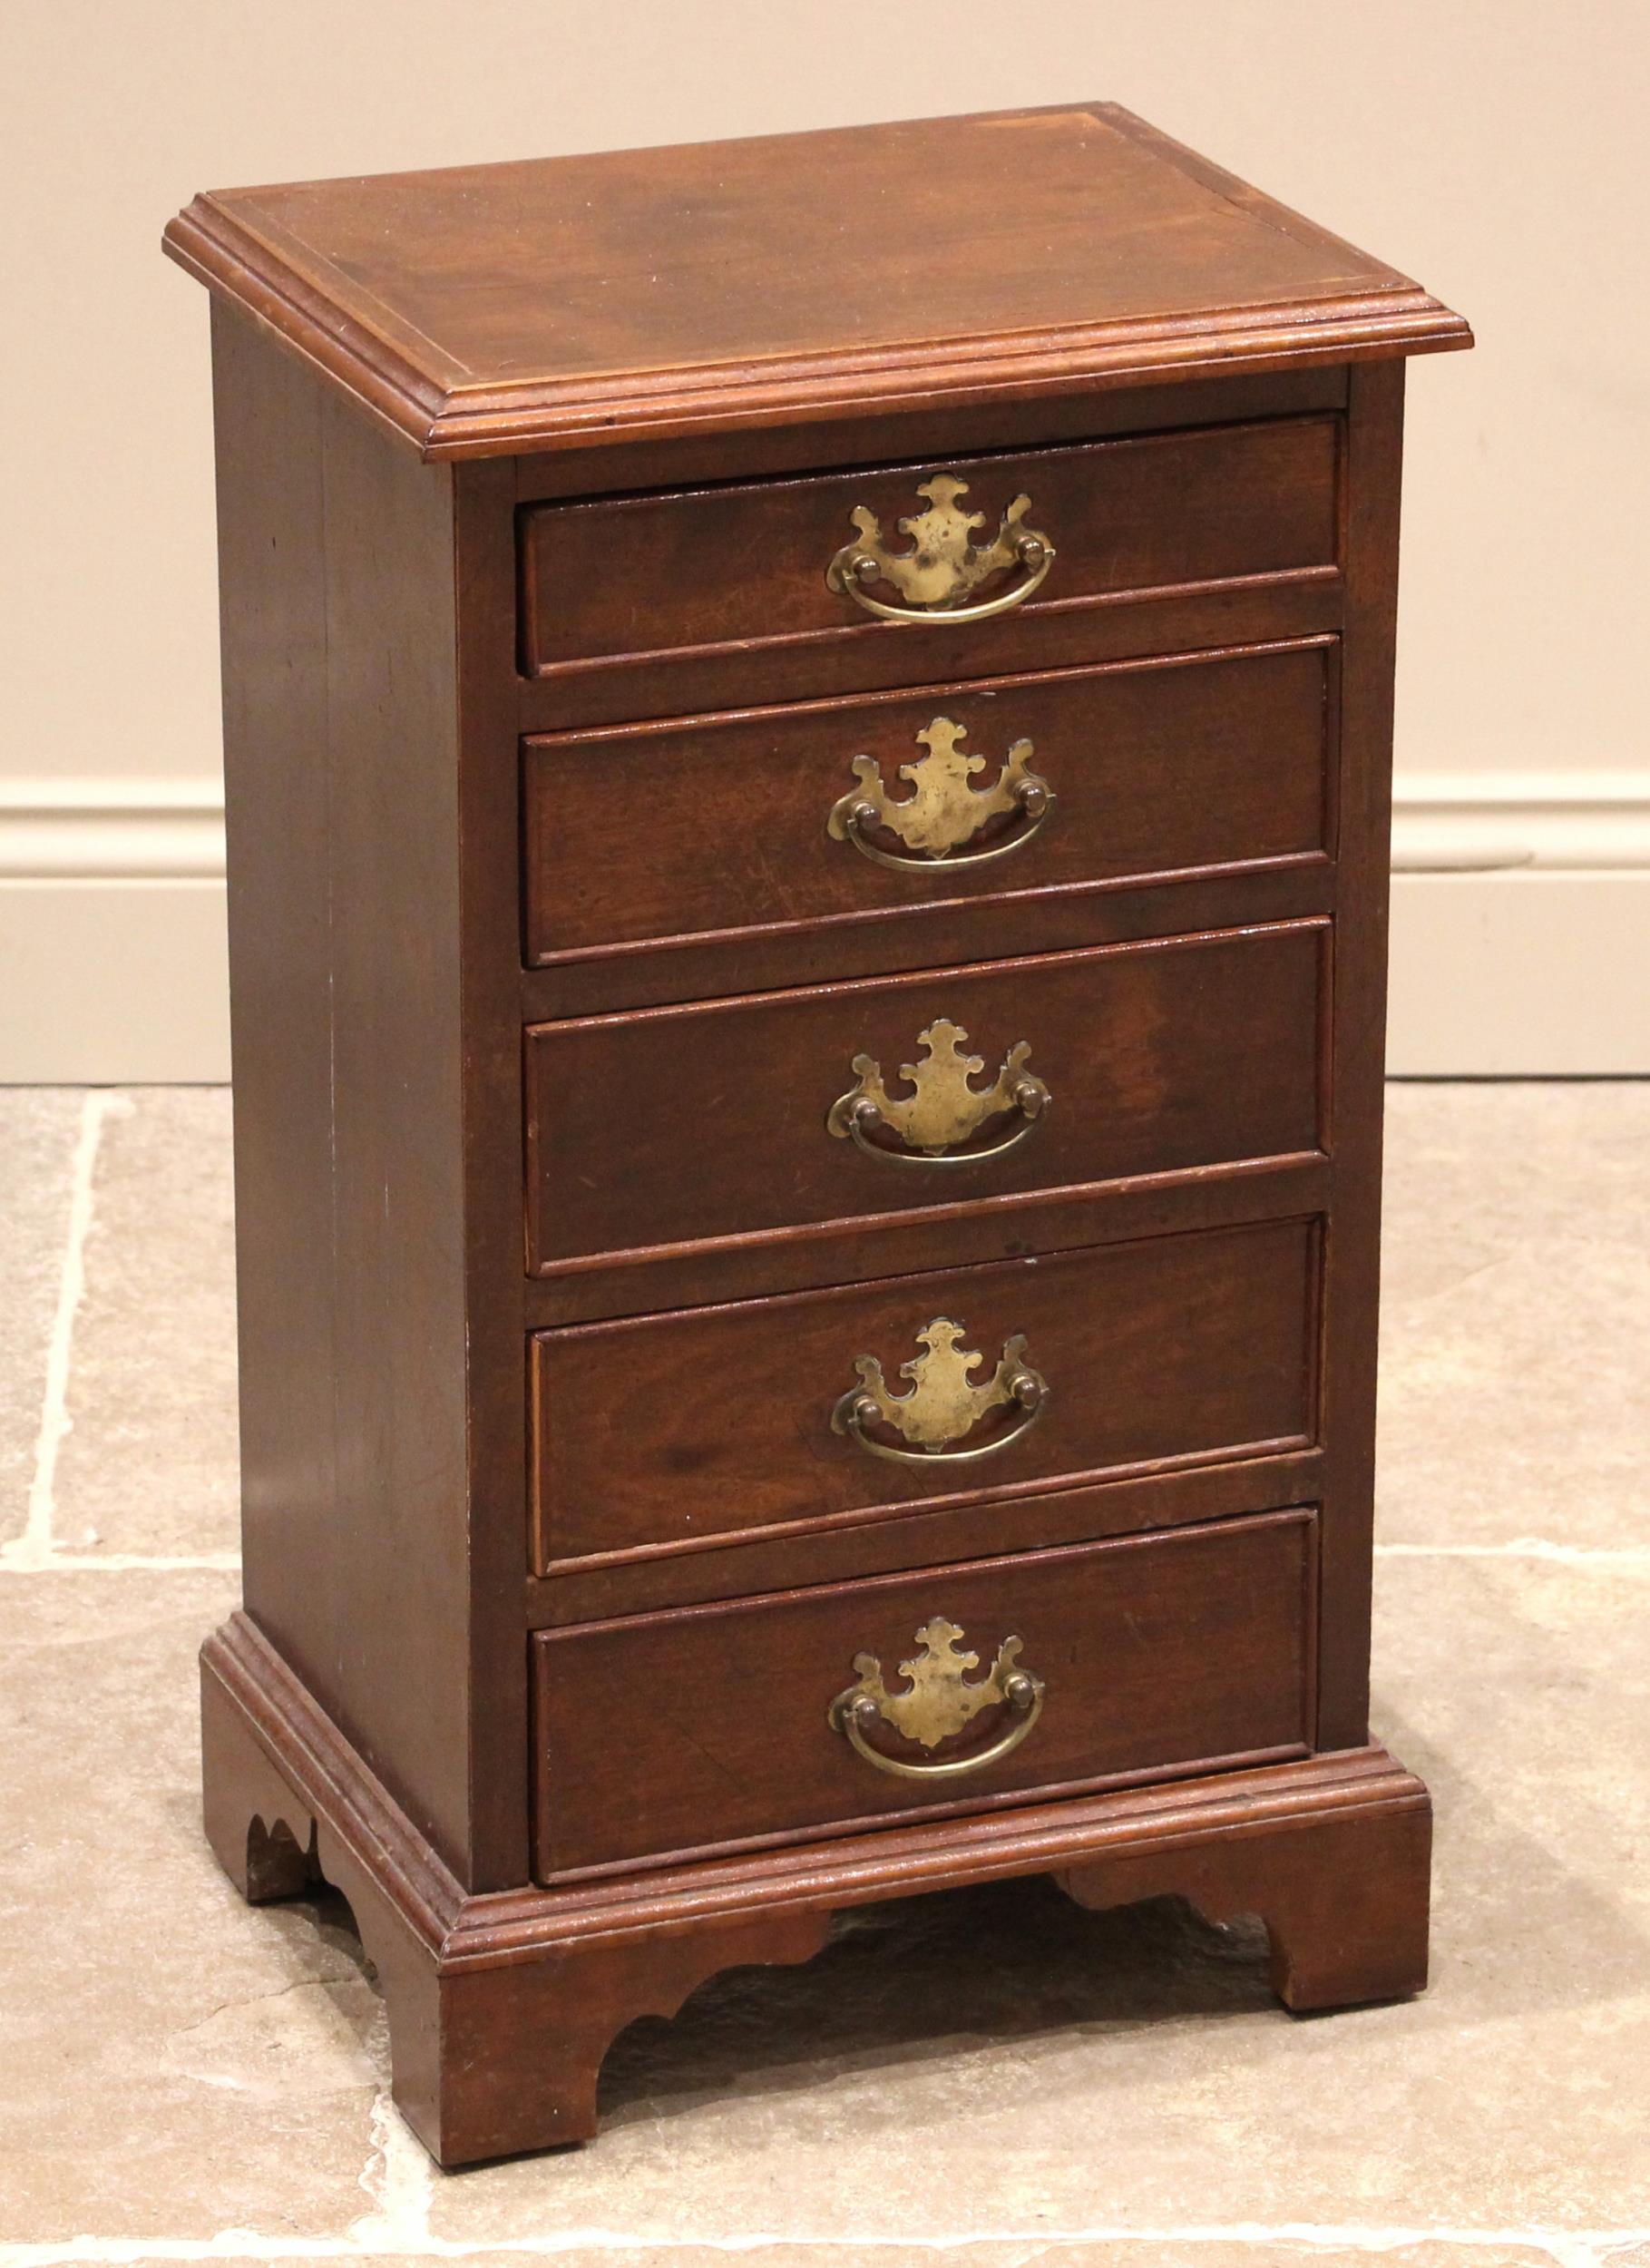 A 19th century and later constructed mahogany collectors pedestal chest, formed with five